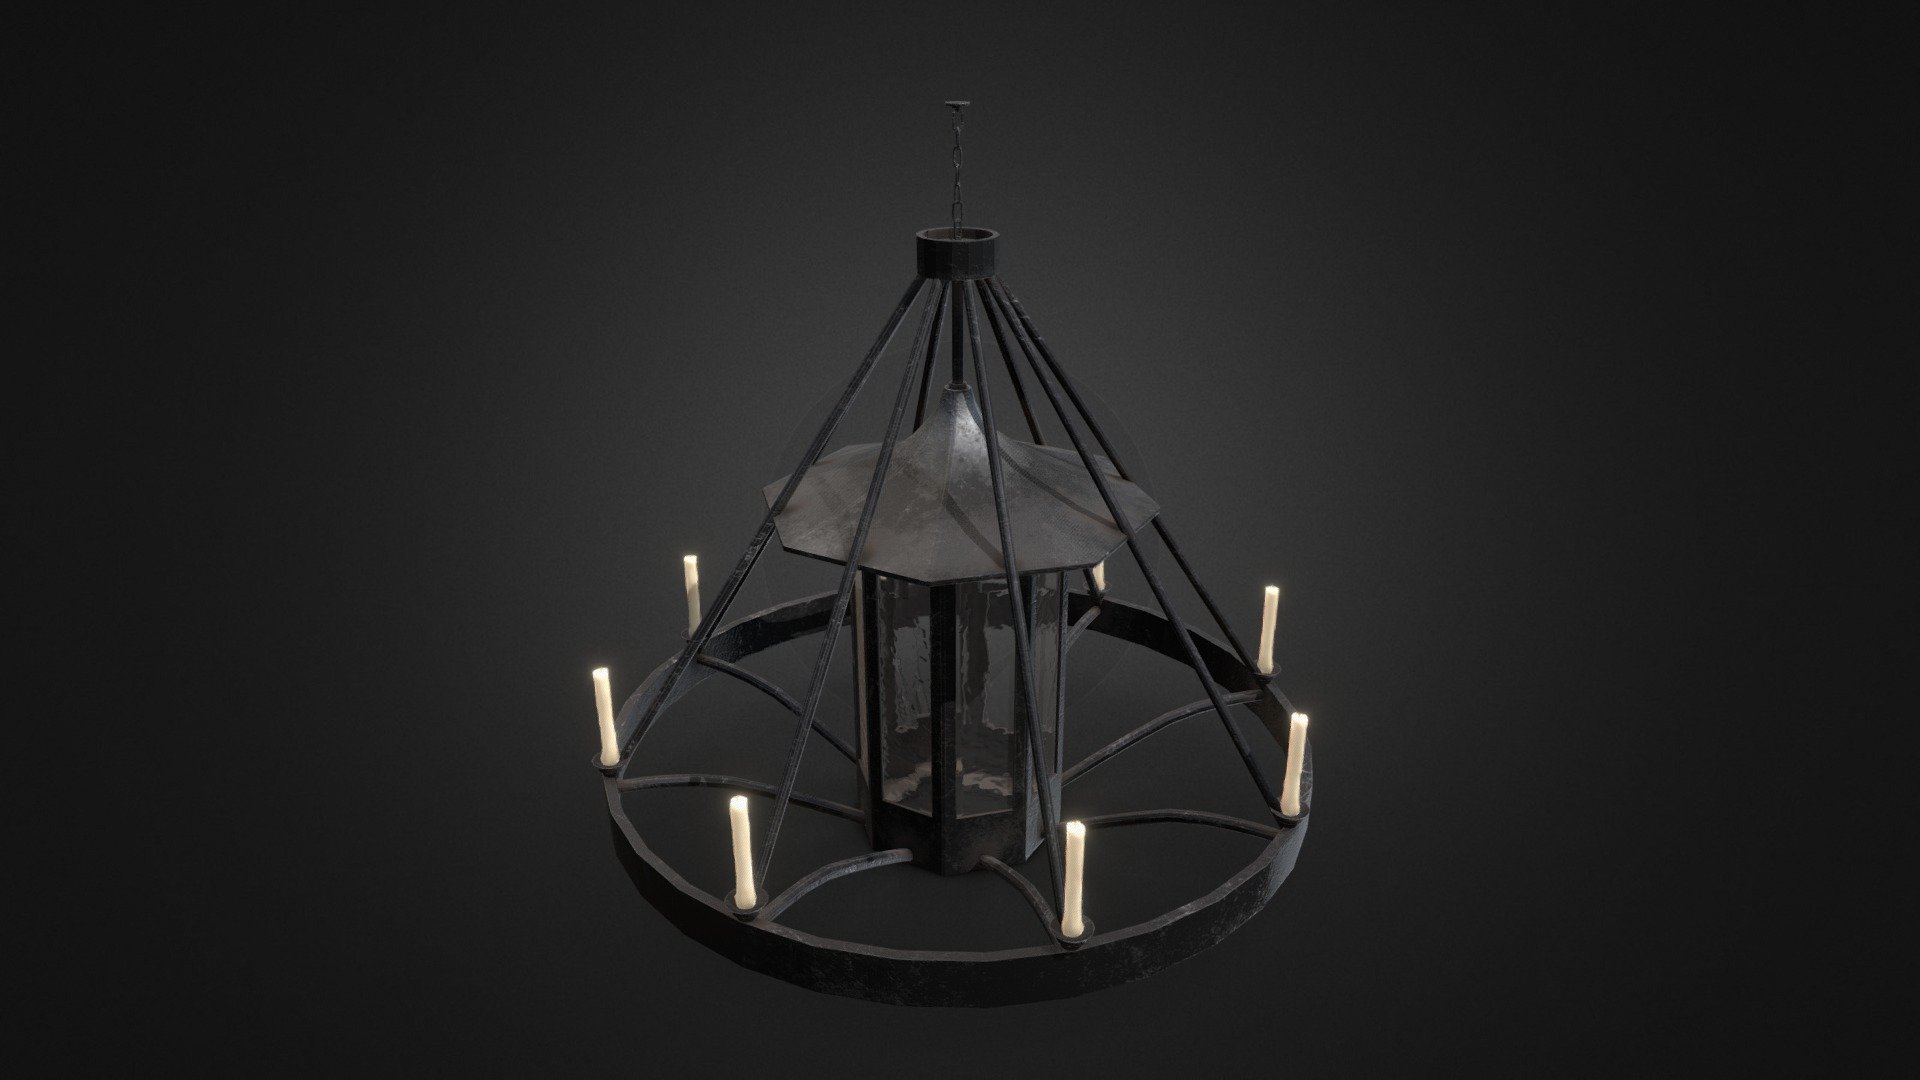 This is a chandelier 3d model made for old environments such as mansions or castles - Ceiling Chandelier - 3D model by IPfuentes 3d model